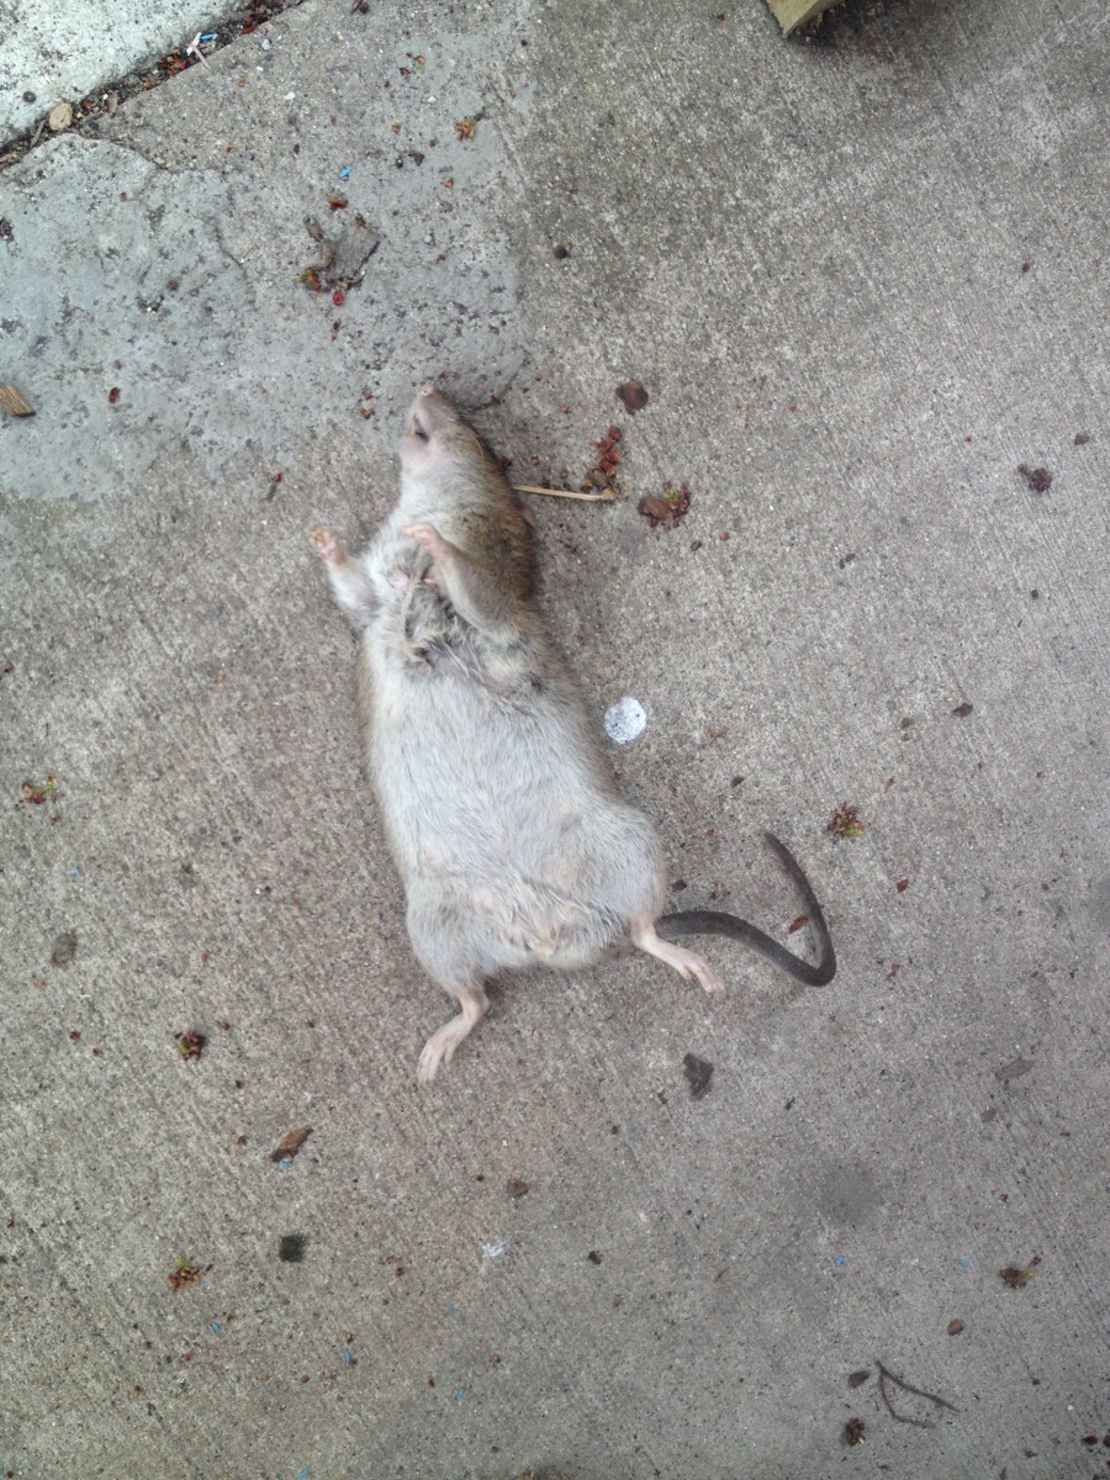 Opinion  Is There Any Humane Way to Kill a Mouse? - The New York